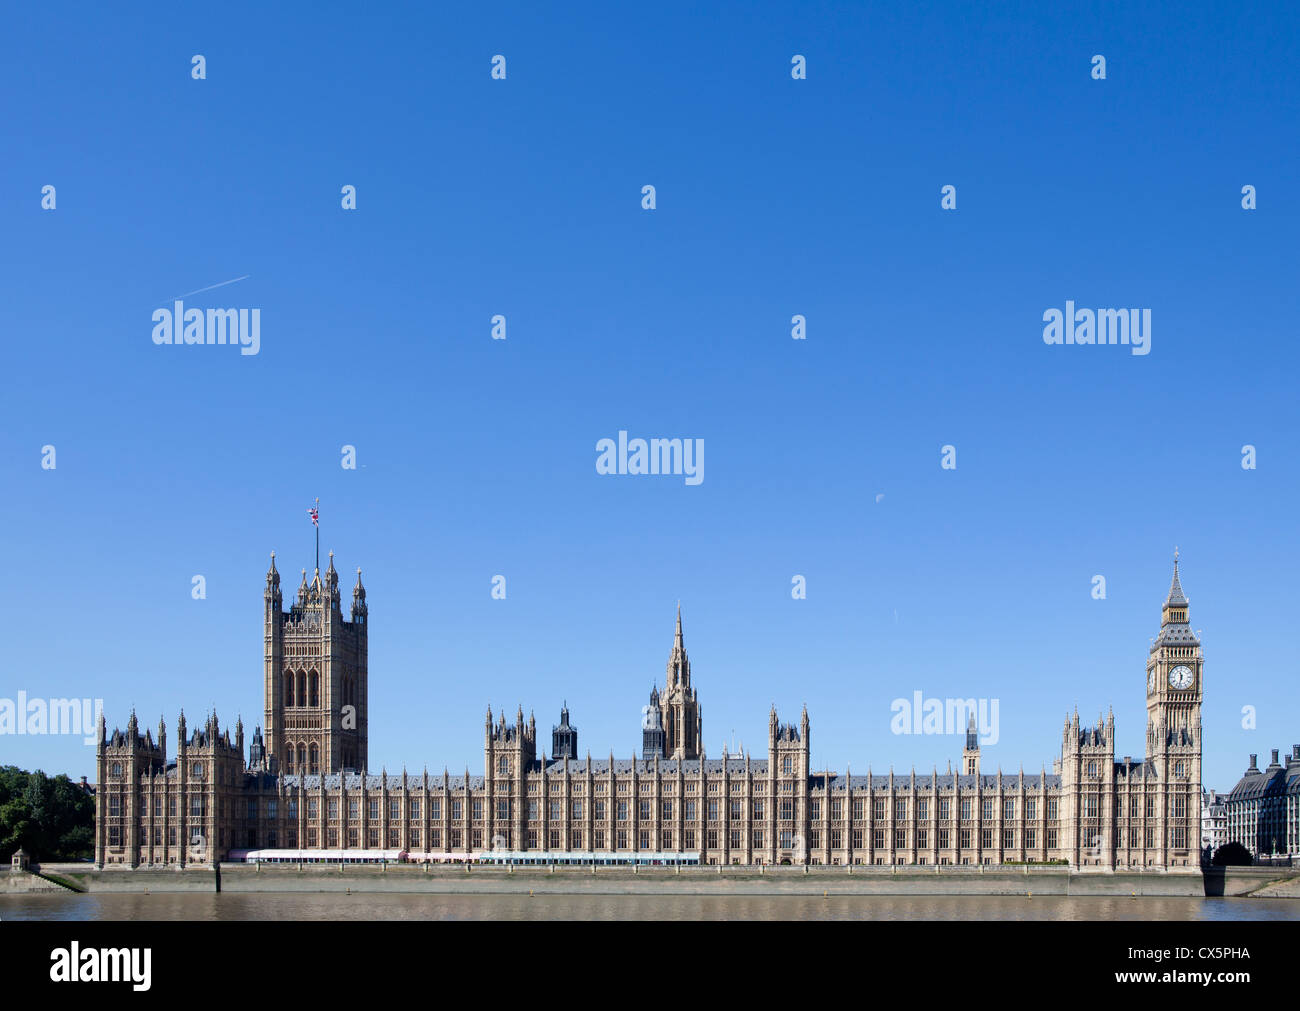 The Palace of Westminster - Houses of Parliament Stock Photo